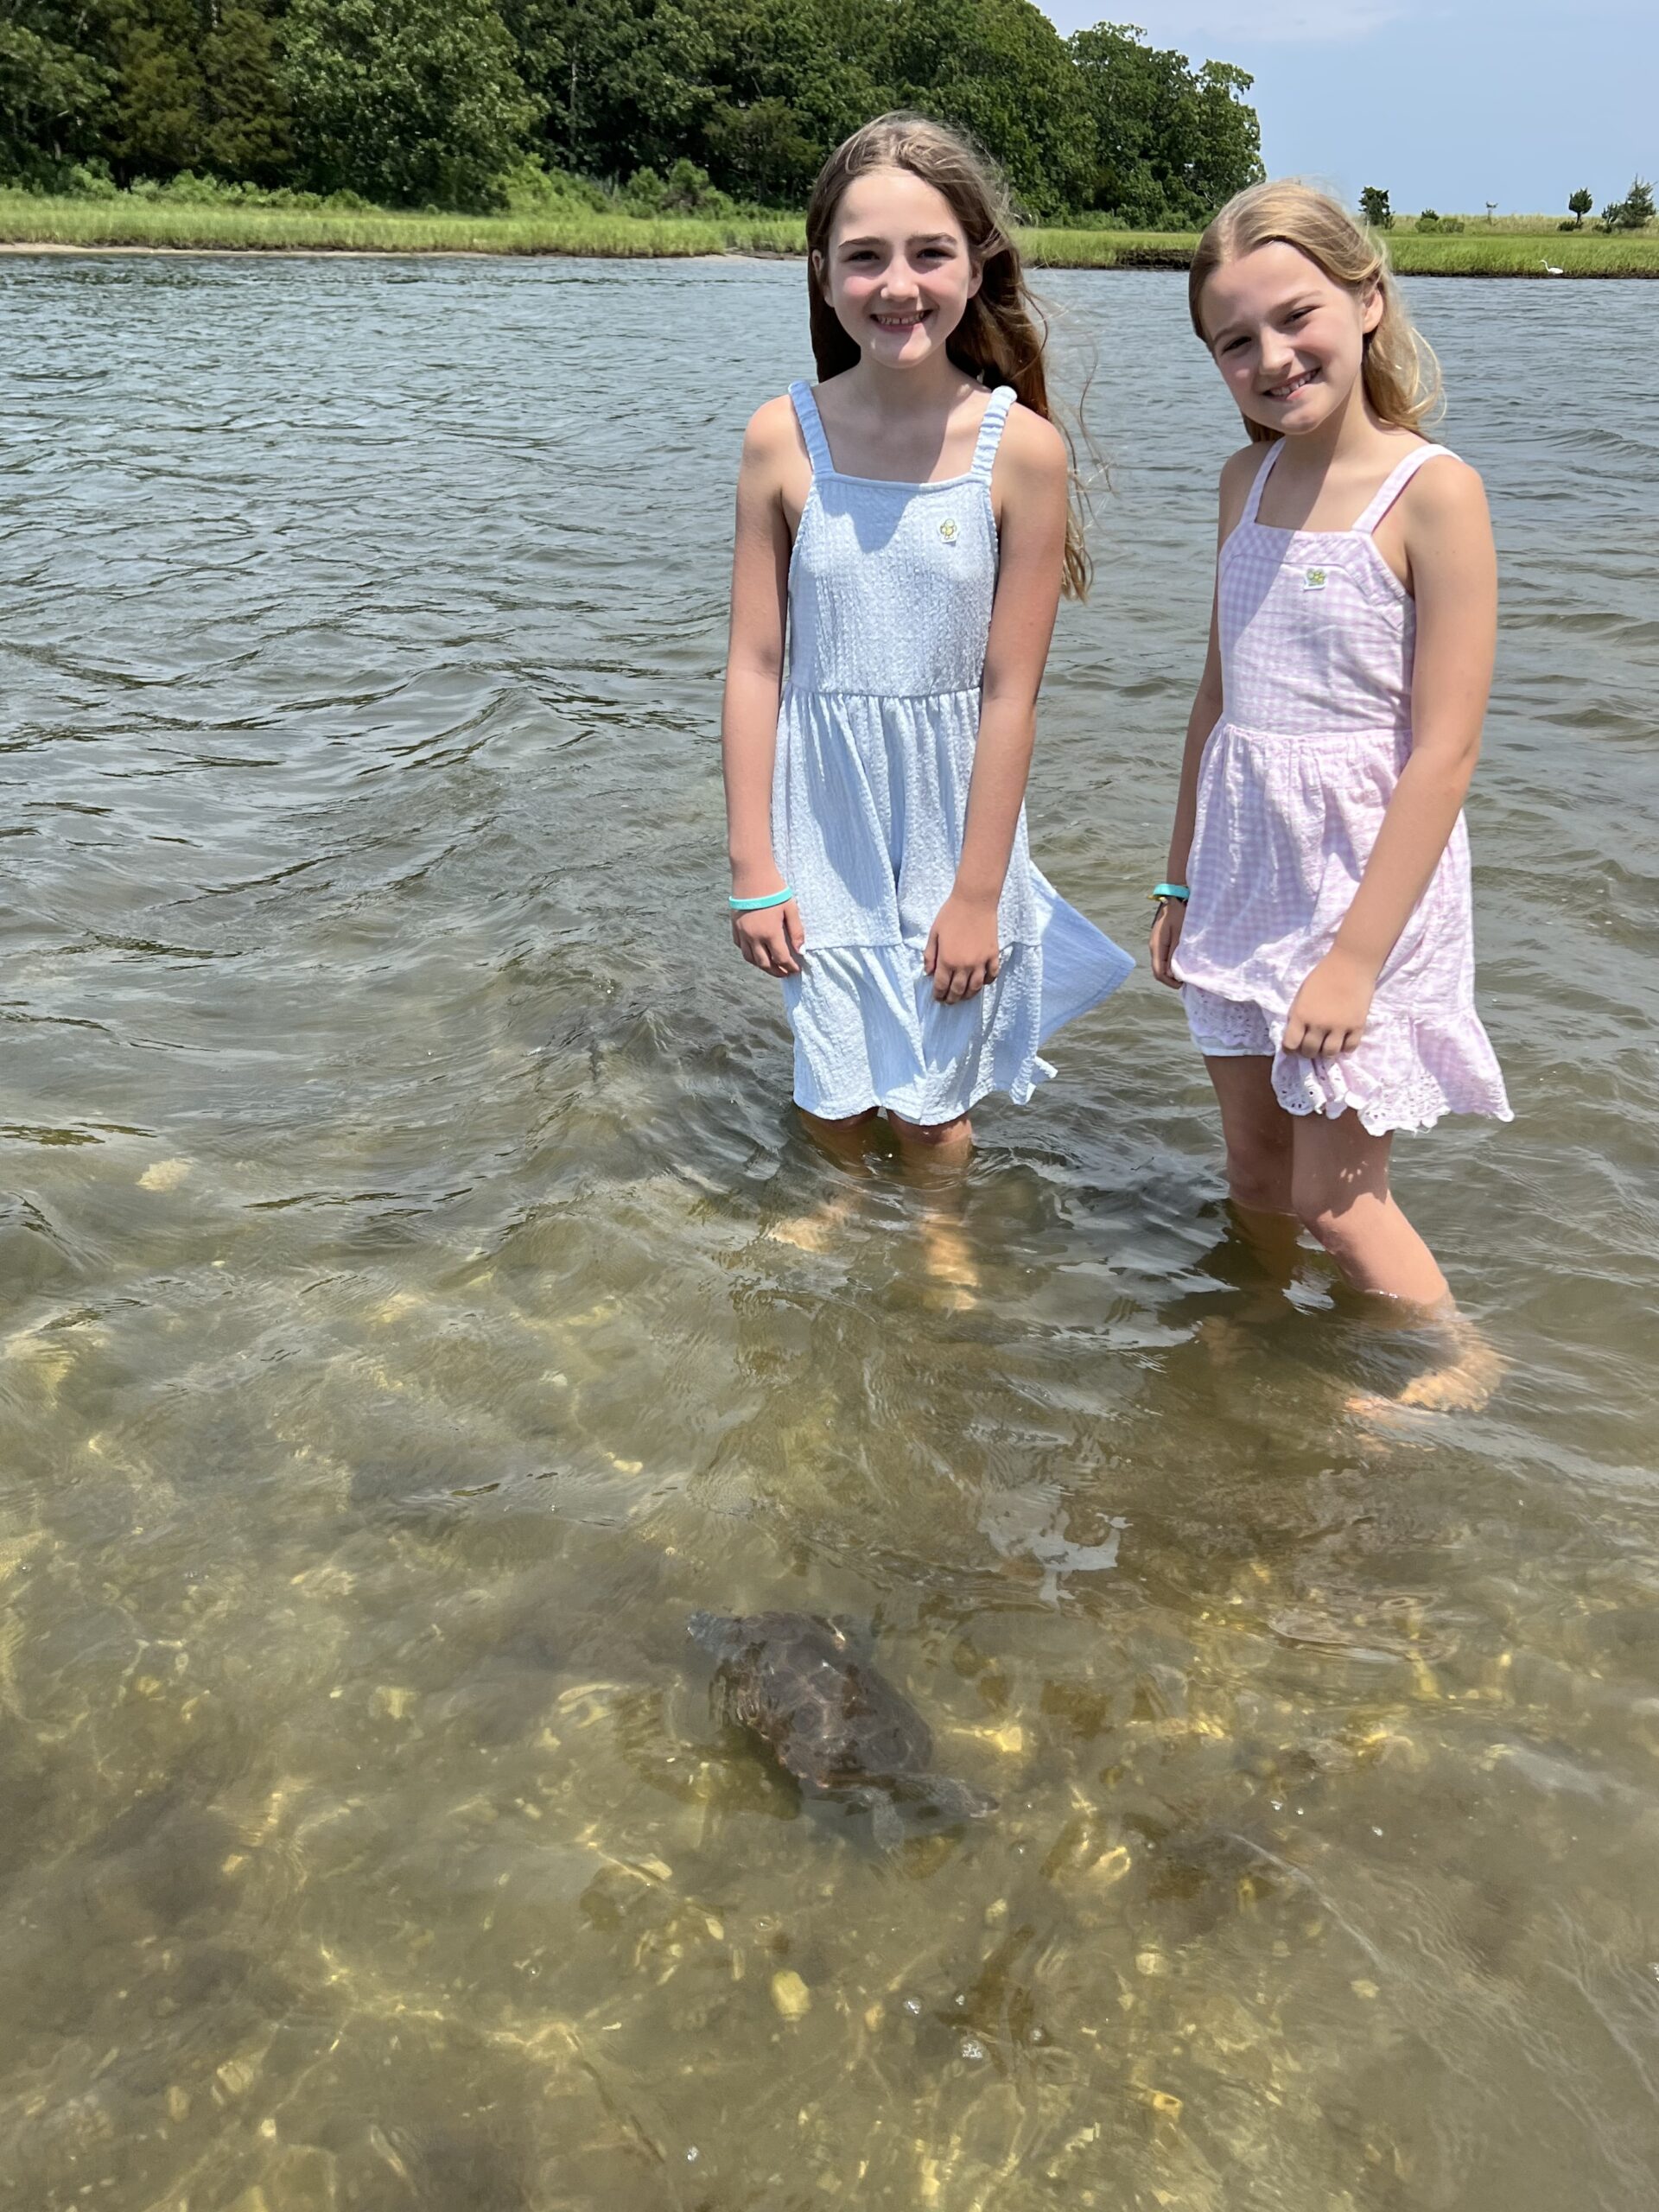 COURTESY JOHN WOBENSMITH Ella (left) and Gracie (right) releasing Lilly the turtle in Noyak Creek.